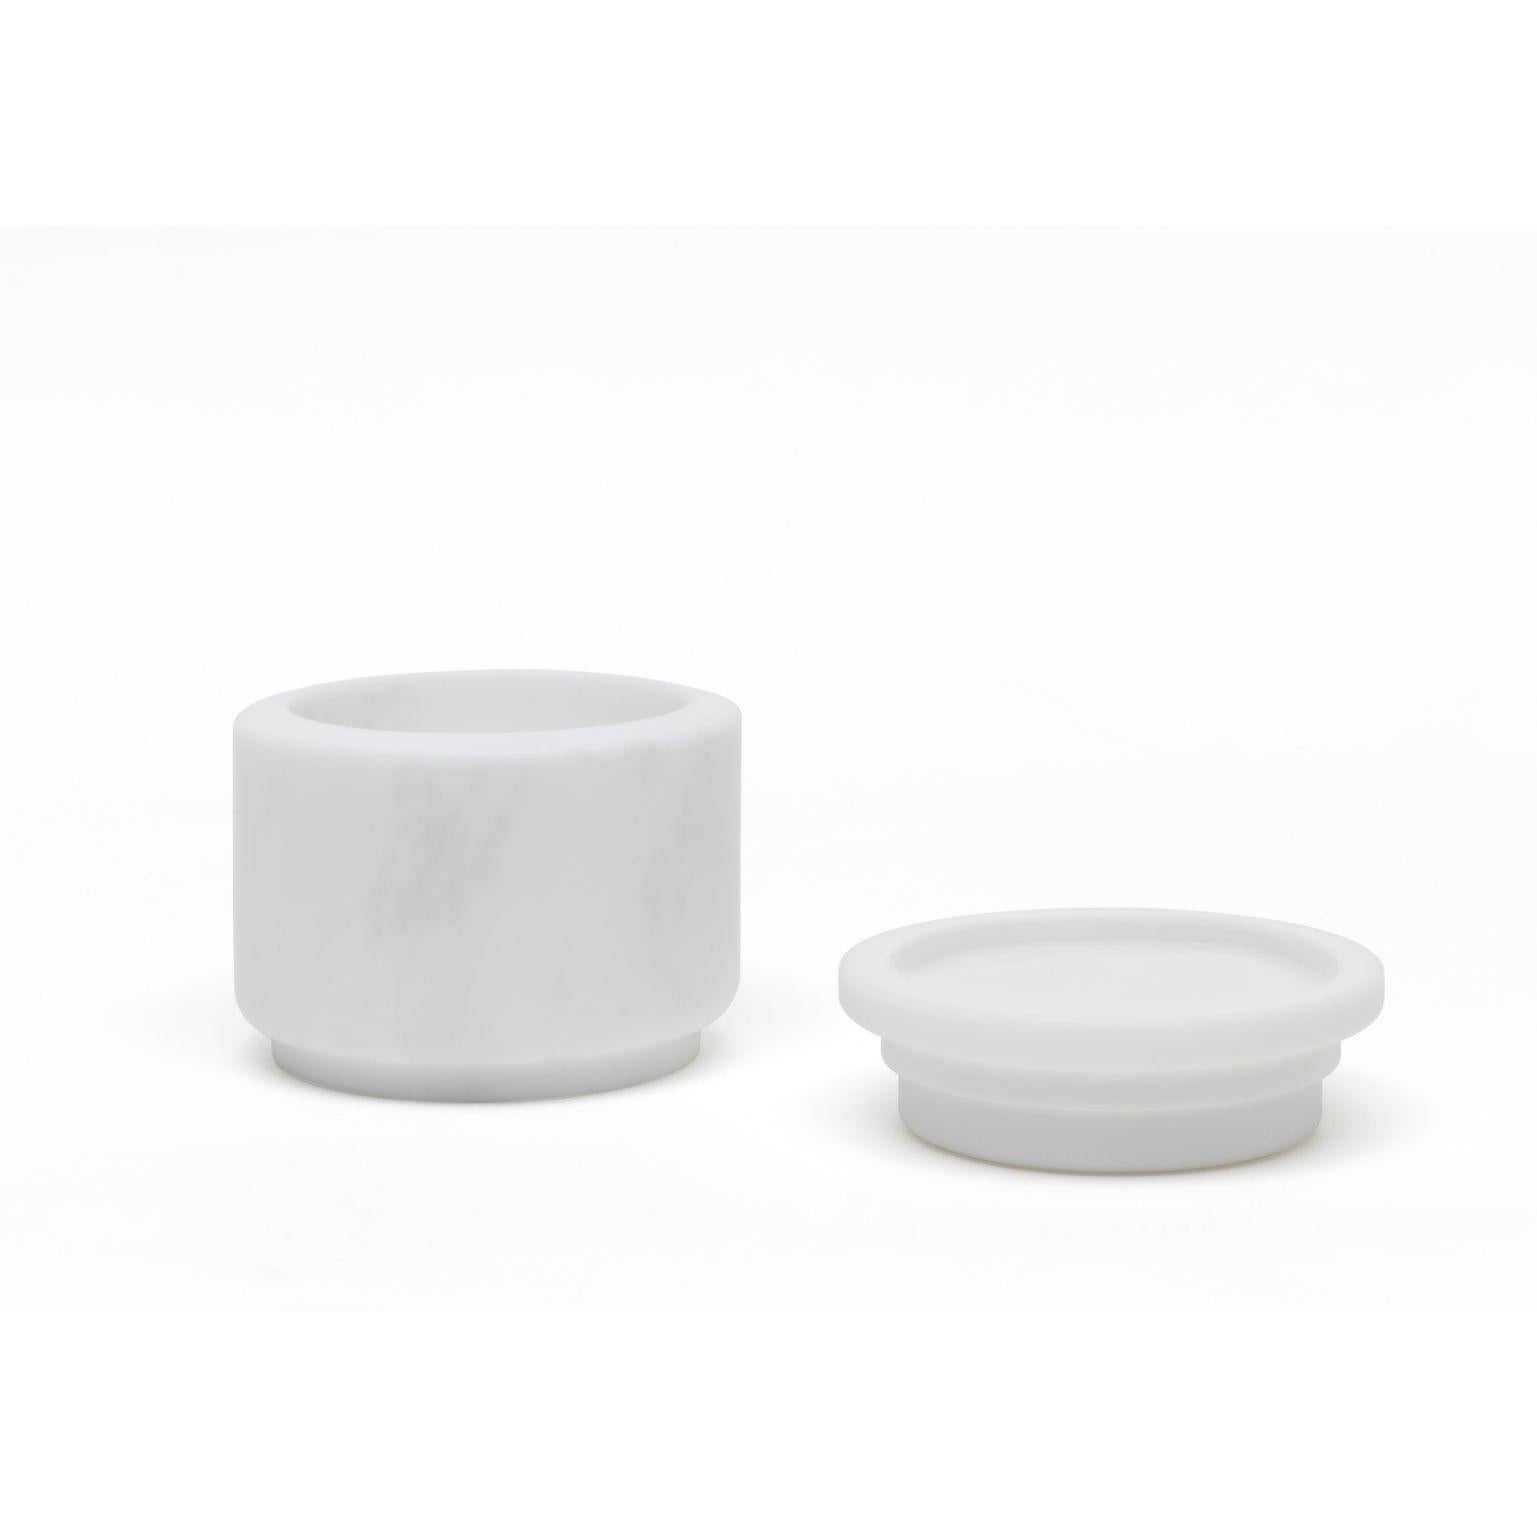 Pyxis - small pot - white by Ivan Colominas
Pyxis Collection
Dimensions: 12.6 x 11 cm
Materials: Bianco Michelangelo

Also available: Nero Marquinia, medium & large 

A refined collection articulated through cylinders that vary only in size